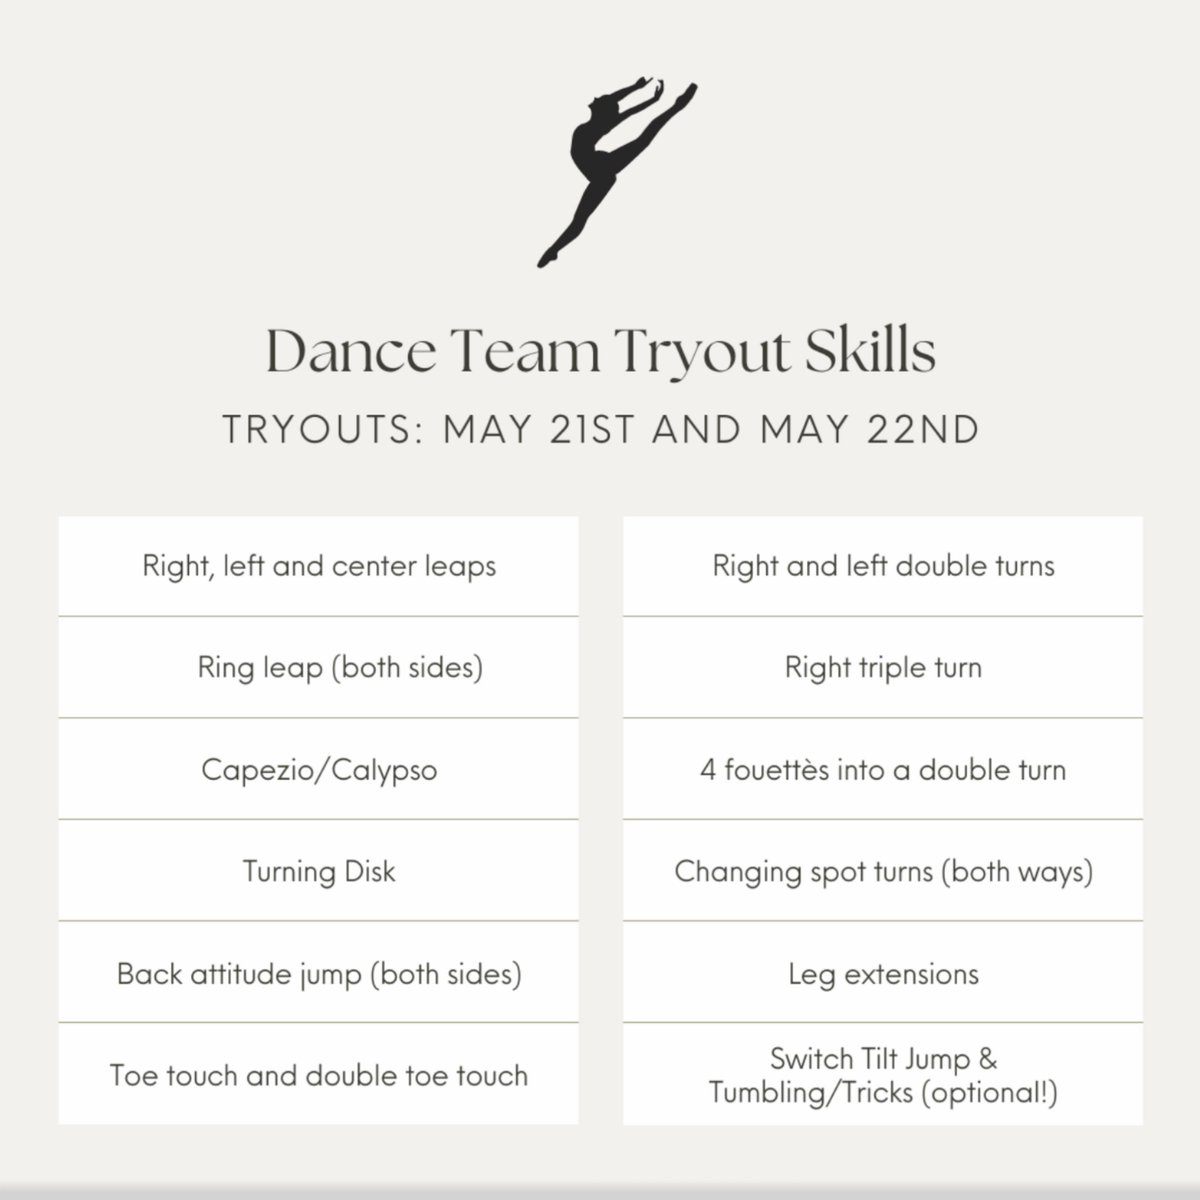 Are you interested in trying out for the Dance Team? Here are the skills they'll be testing at their tryouts to help you get started in preparing! Contact the head coaches or message the Dance Team Instagram with any questions.